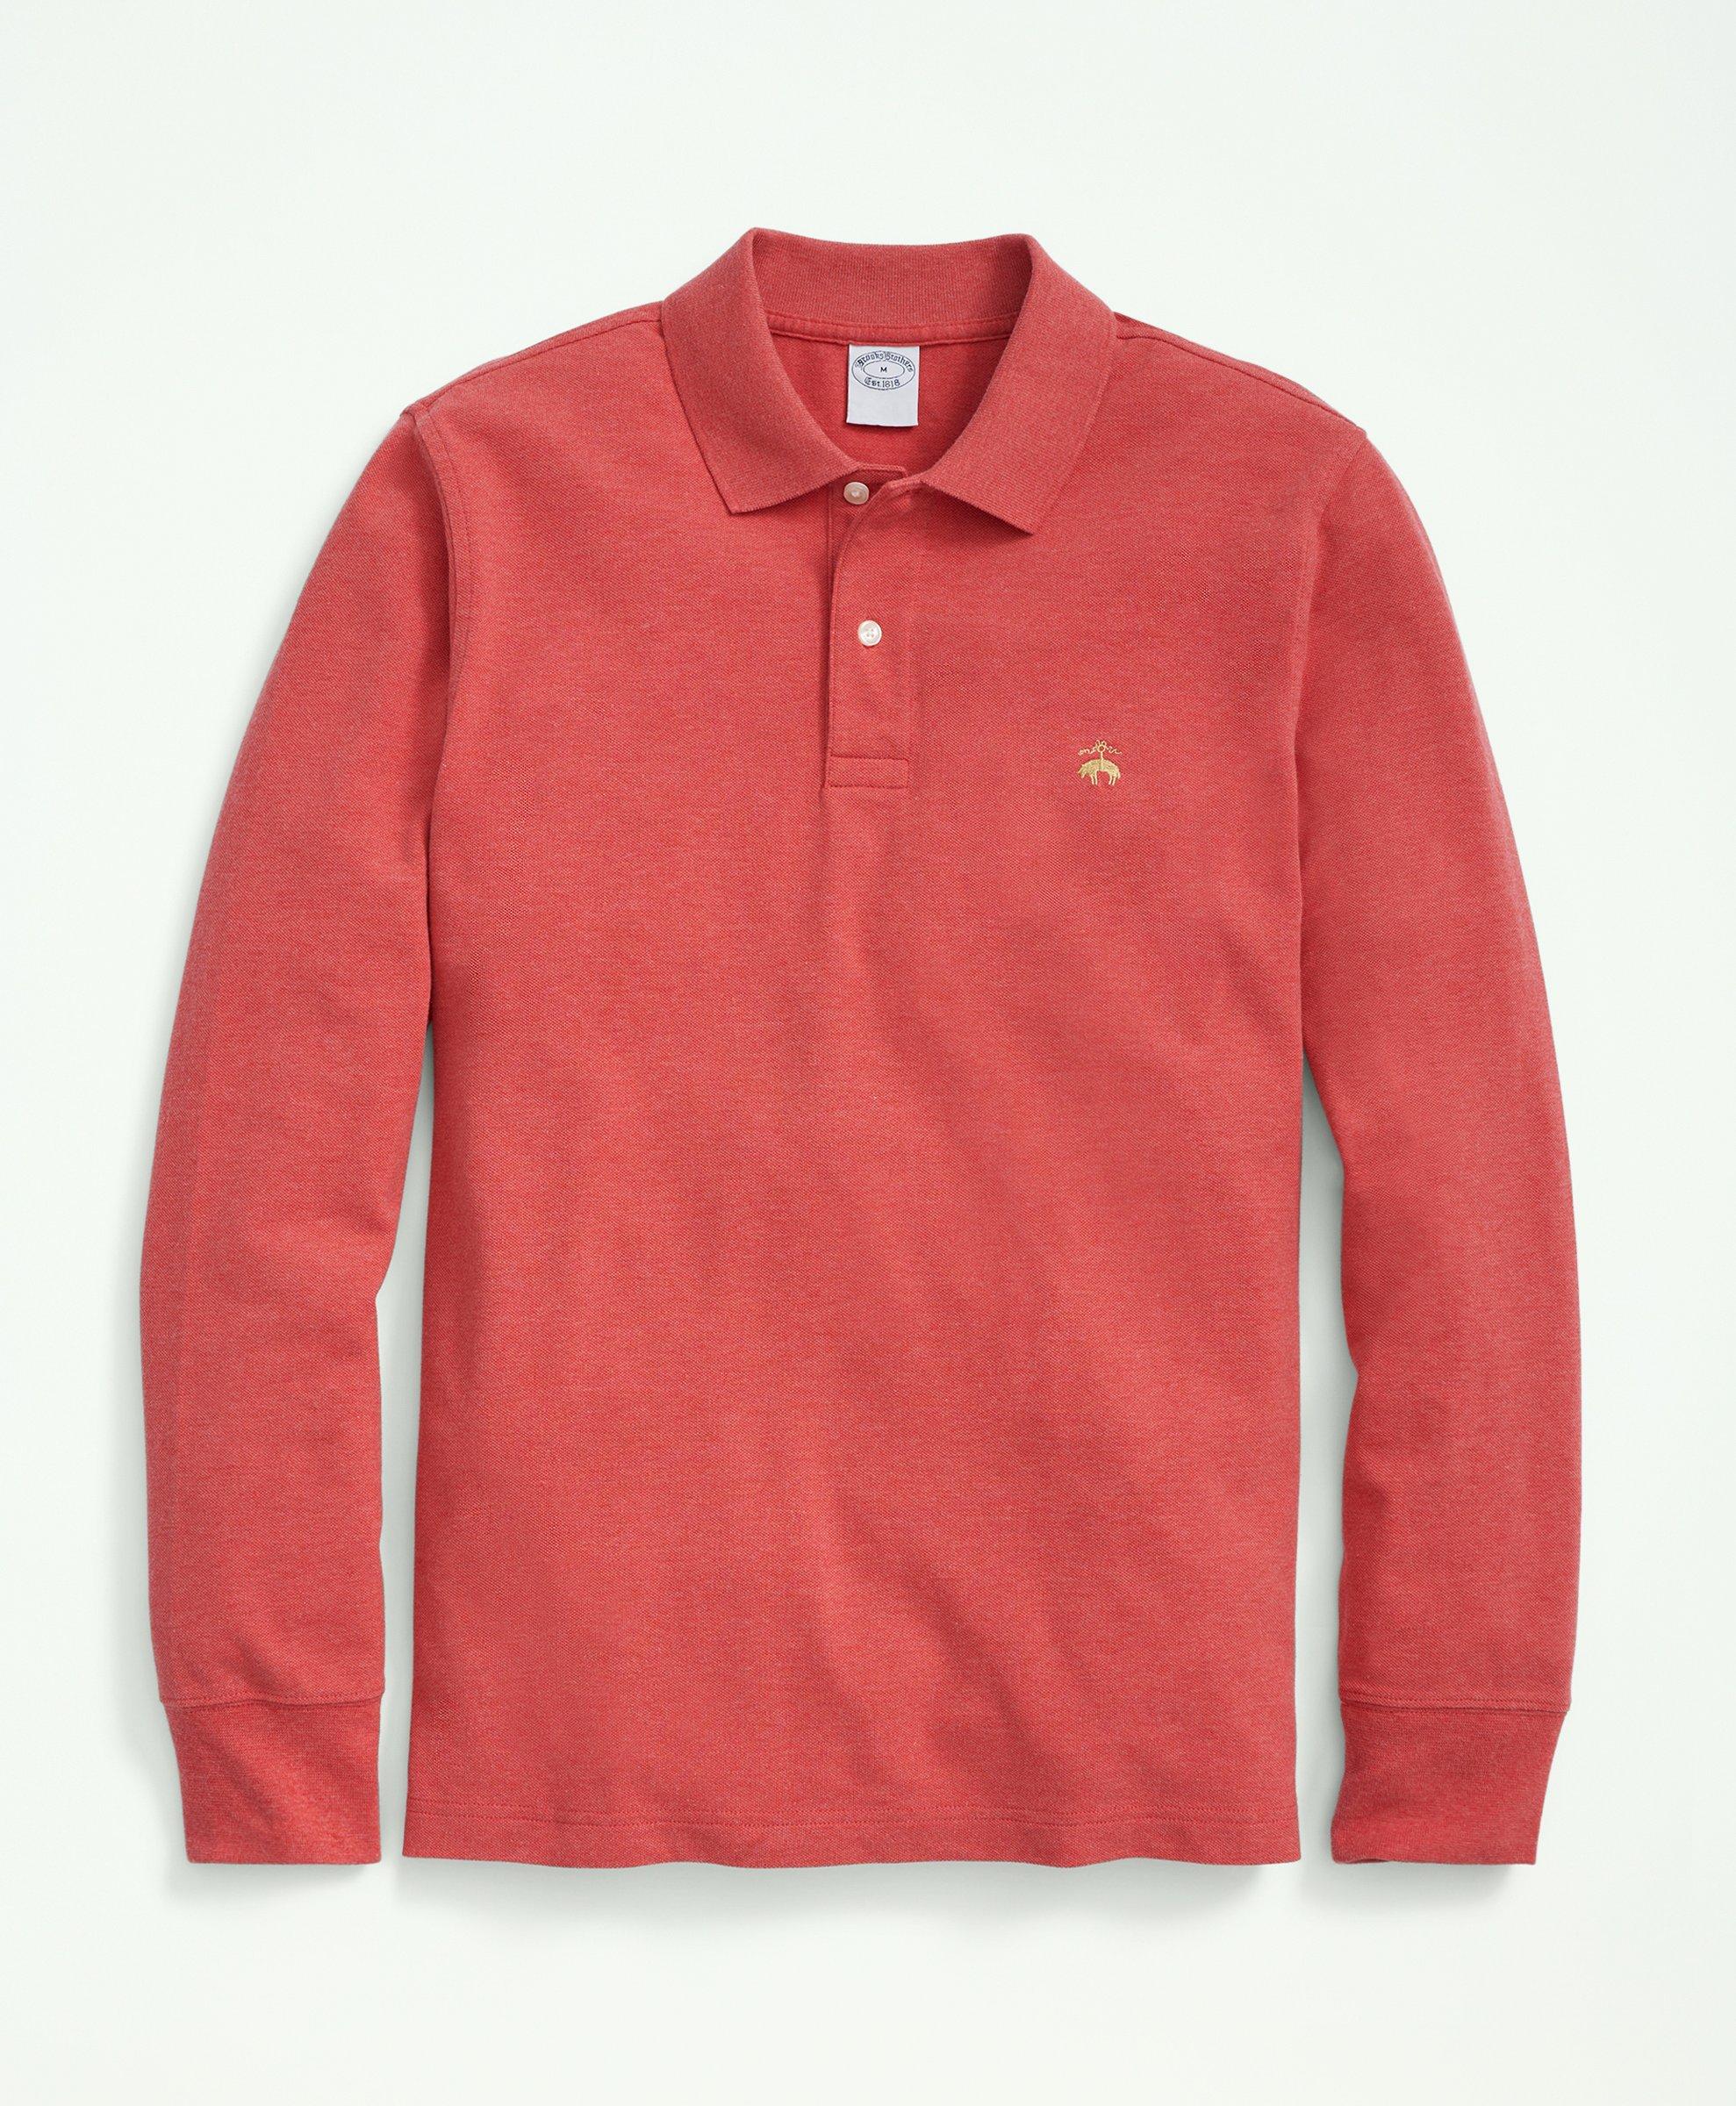 Brooks Brothers Golden Fleece Stretch Supima Long-sleeve Polo Shirt | Medium Red Heather | Size Small